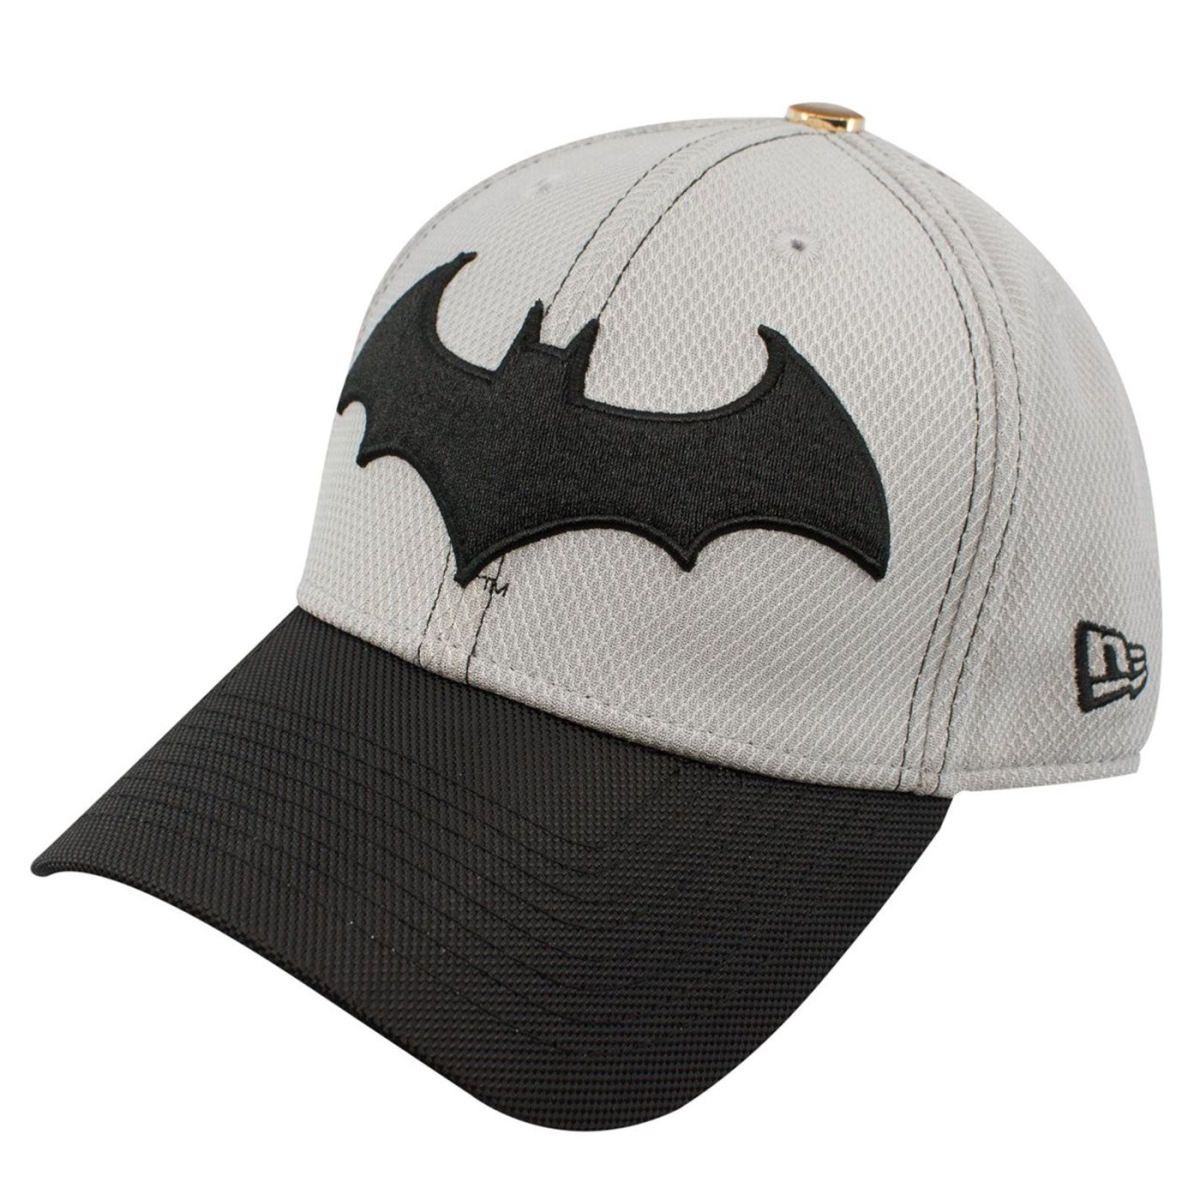 Picture of Batman hatbathusharmcofoline3930-l-x-Large-XLarge Batman Hush Armor with Court of Owls Lining 39 Thirty Fitted Hat - Large & Extra Large